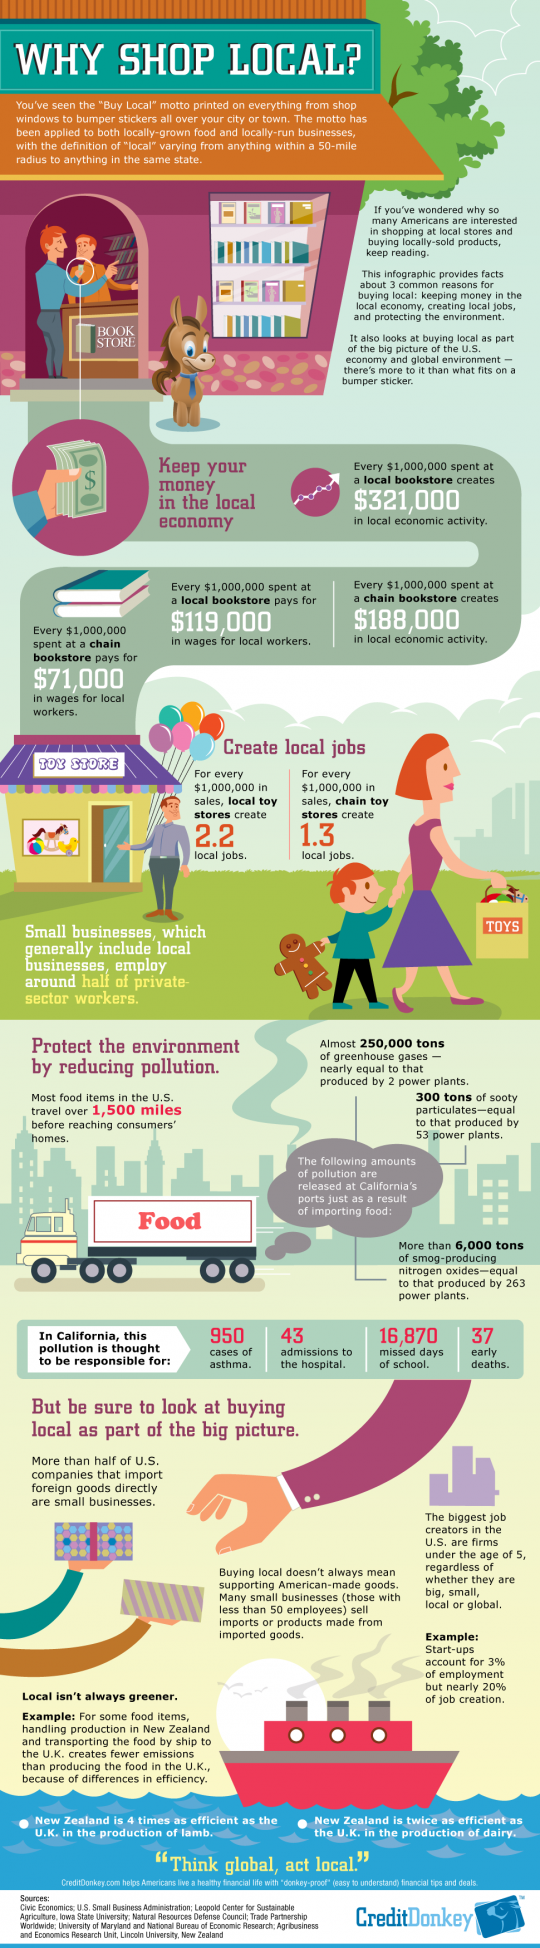 Why Shop Local